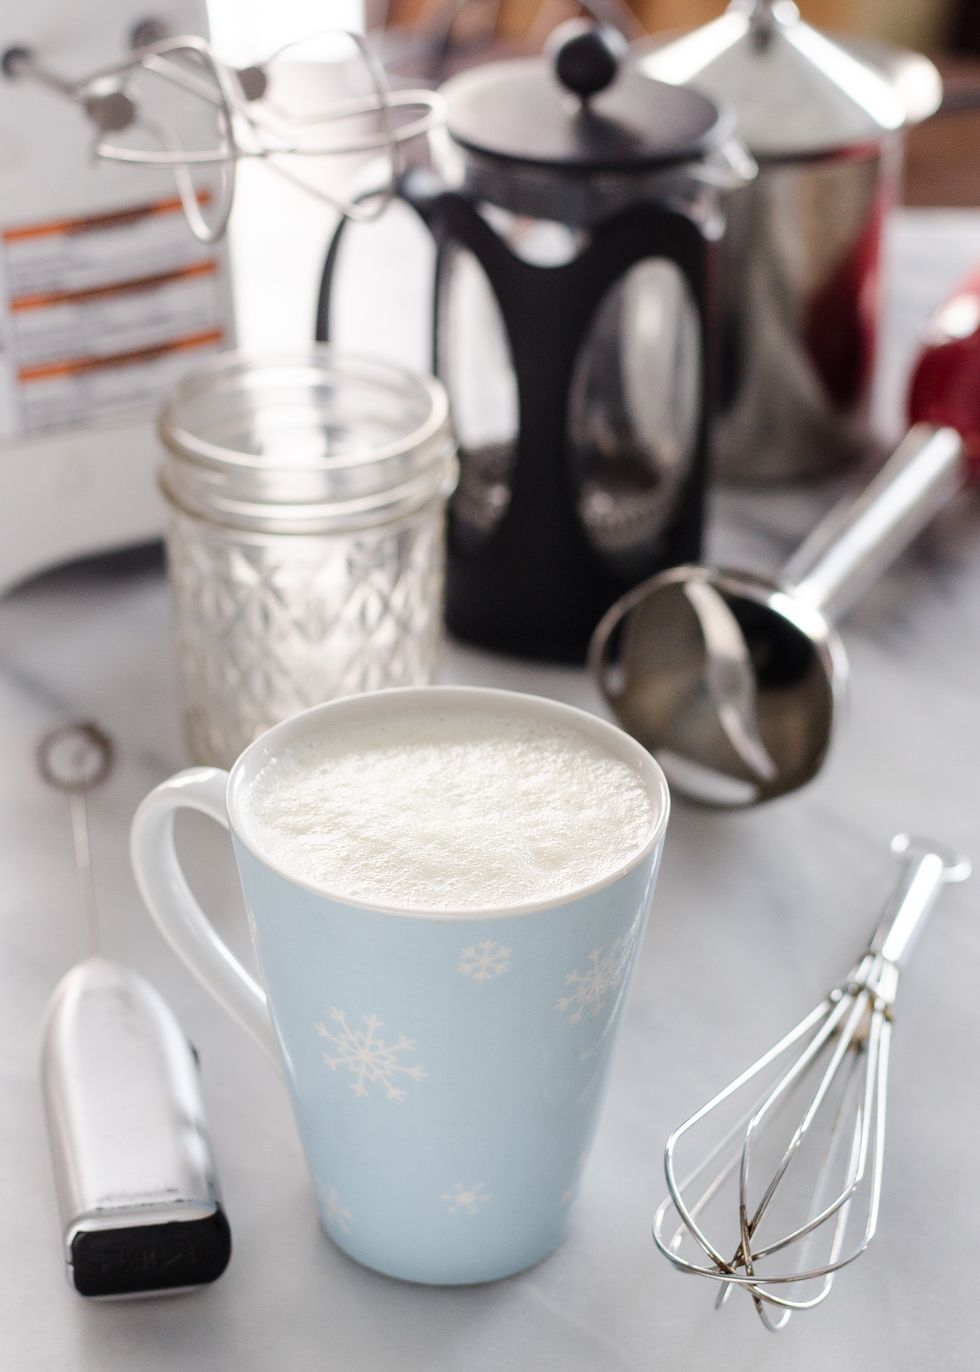 https://hips.hearstapps.com/thepioneerwoman/wp-content/uploads/2017/01/how-to-froth-milk-without-an-espresso-machine-17.jpg?resize=980:*